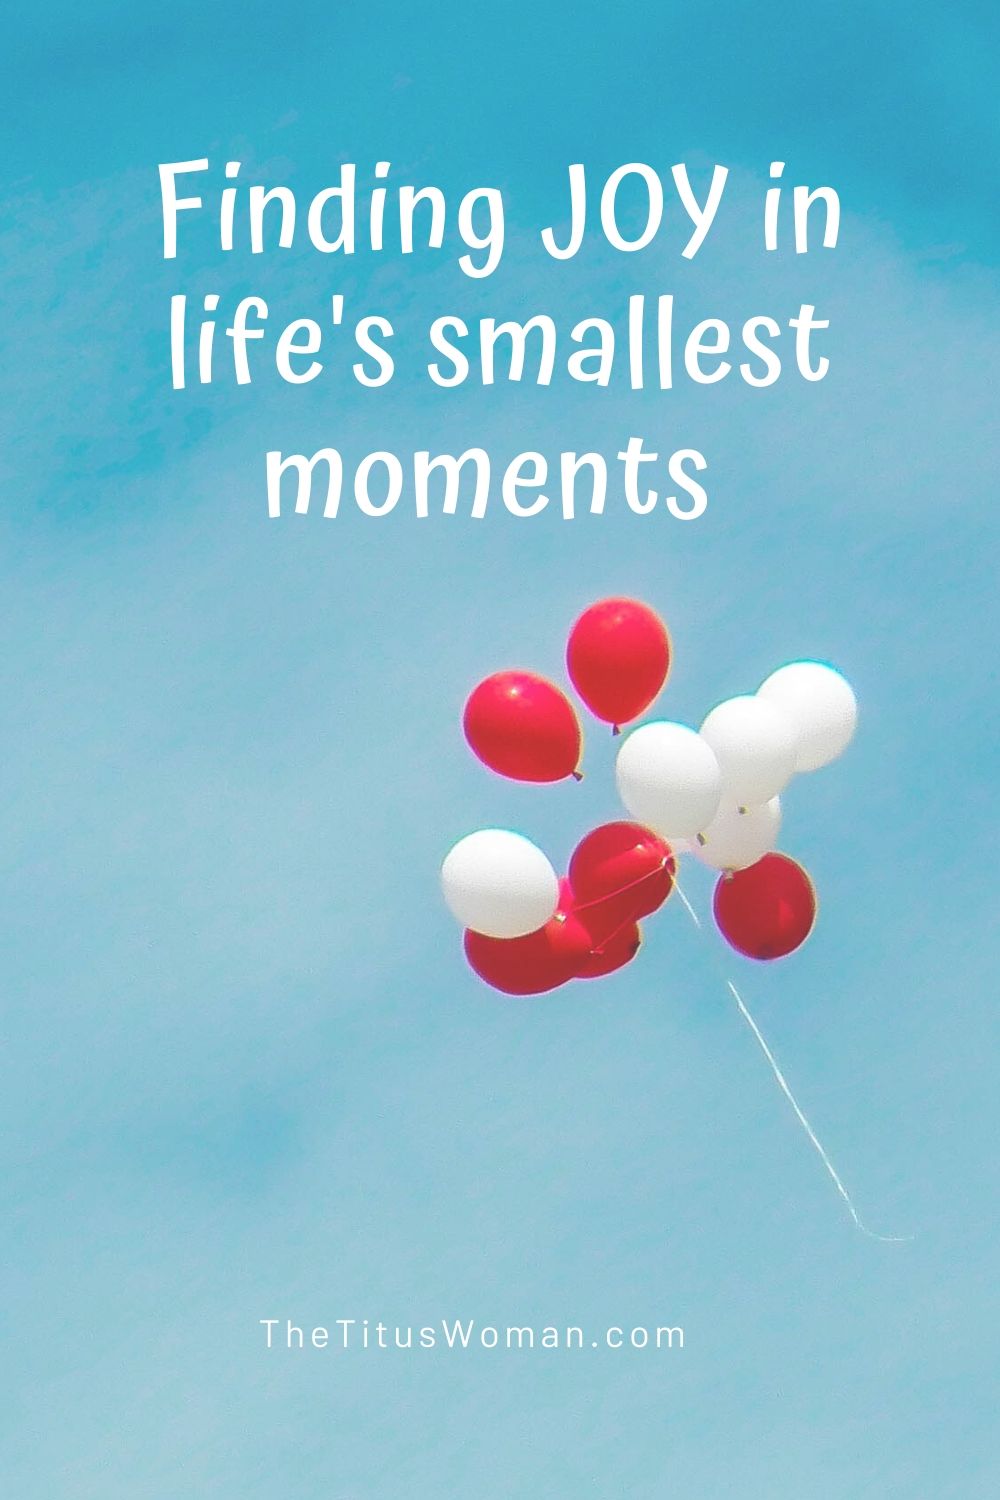 FINDING JOY IN LIFE'S SMALLEST MOMENTS